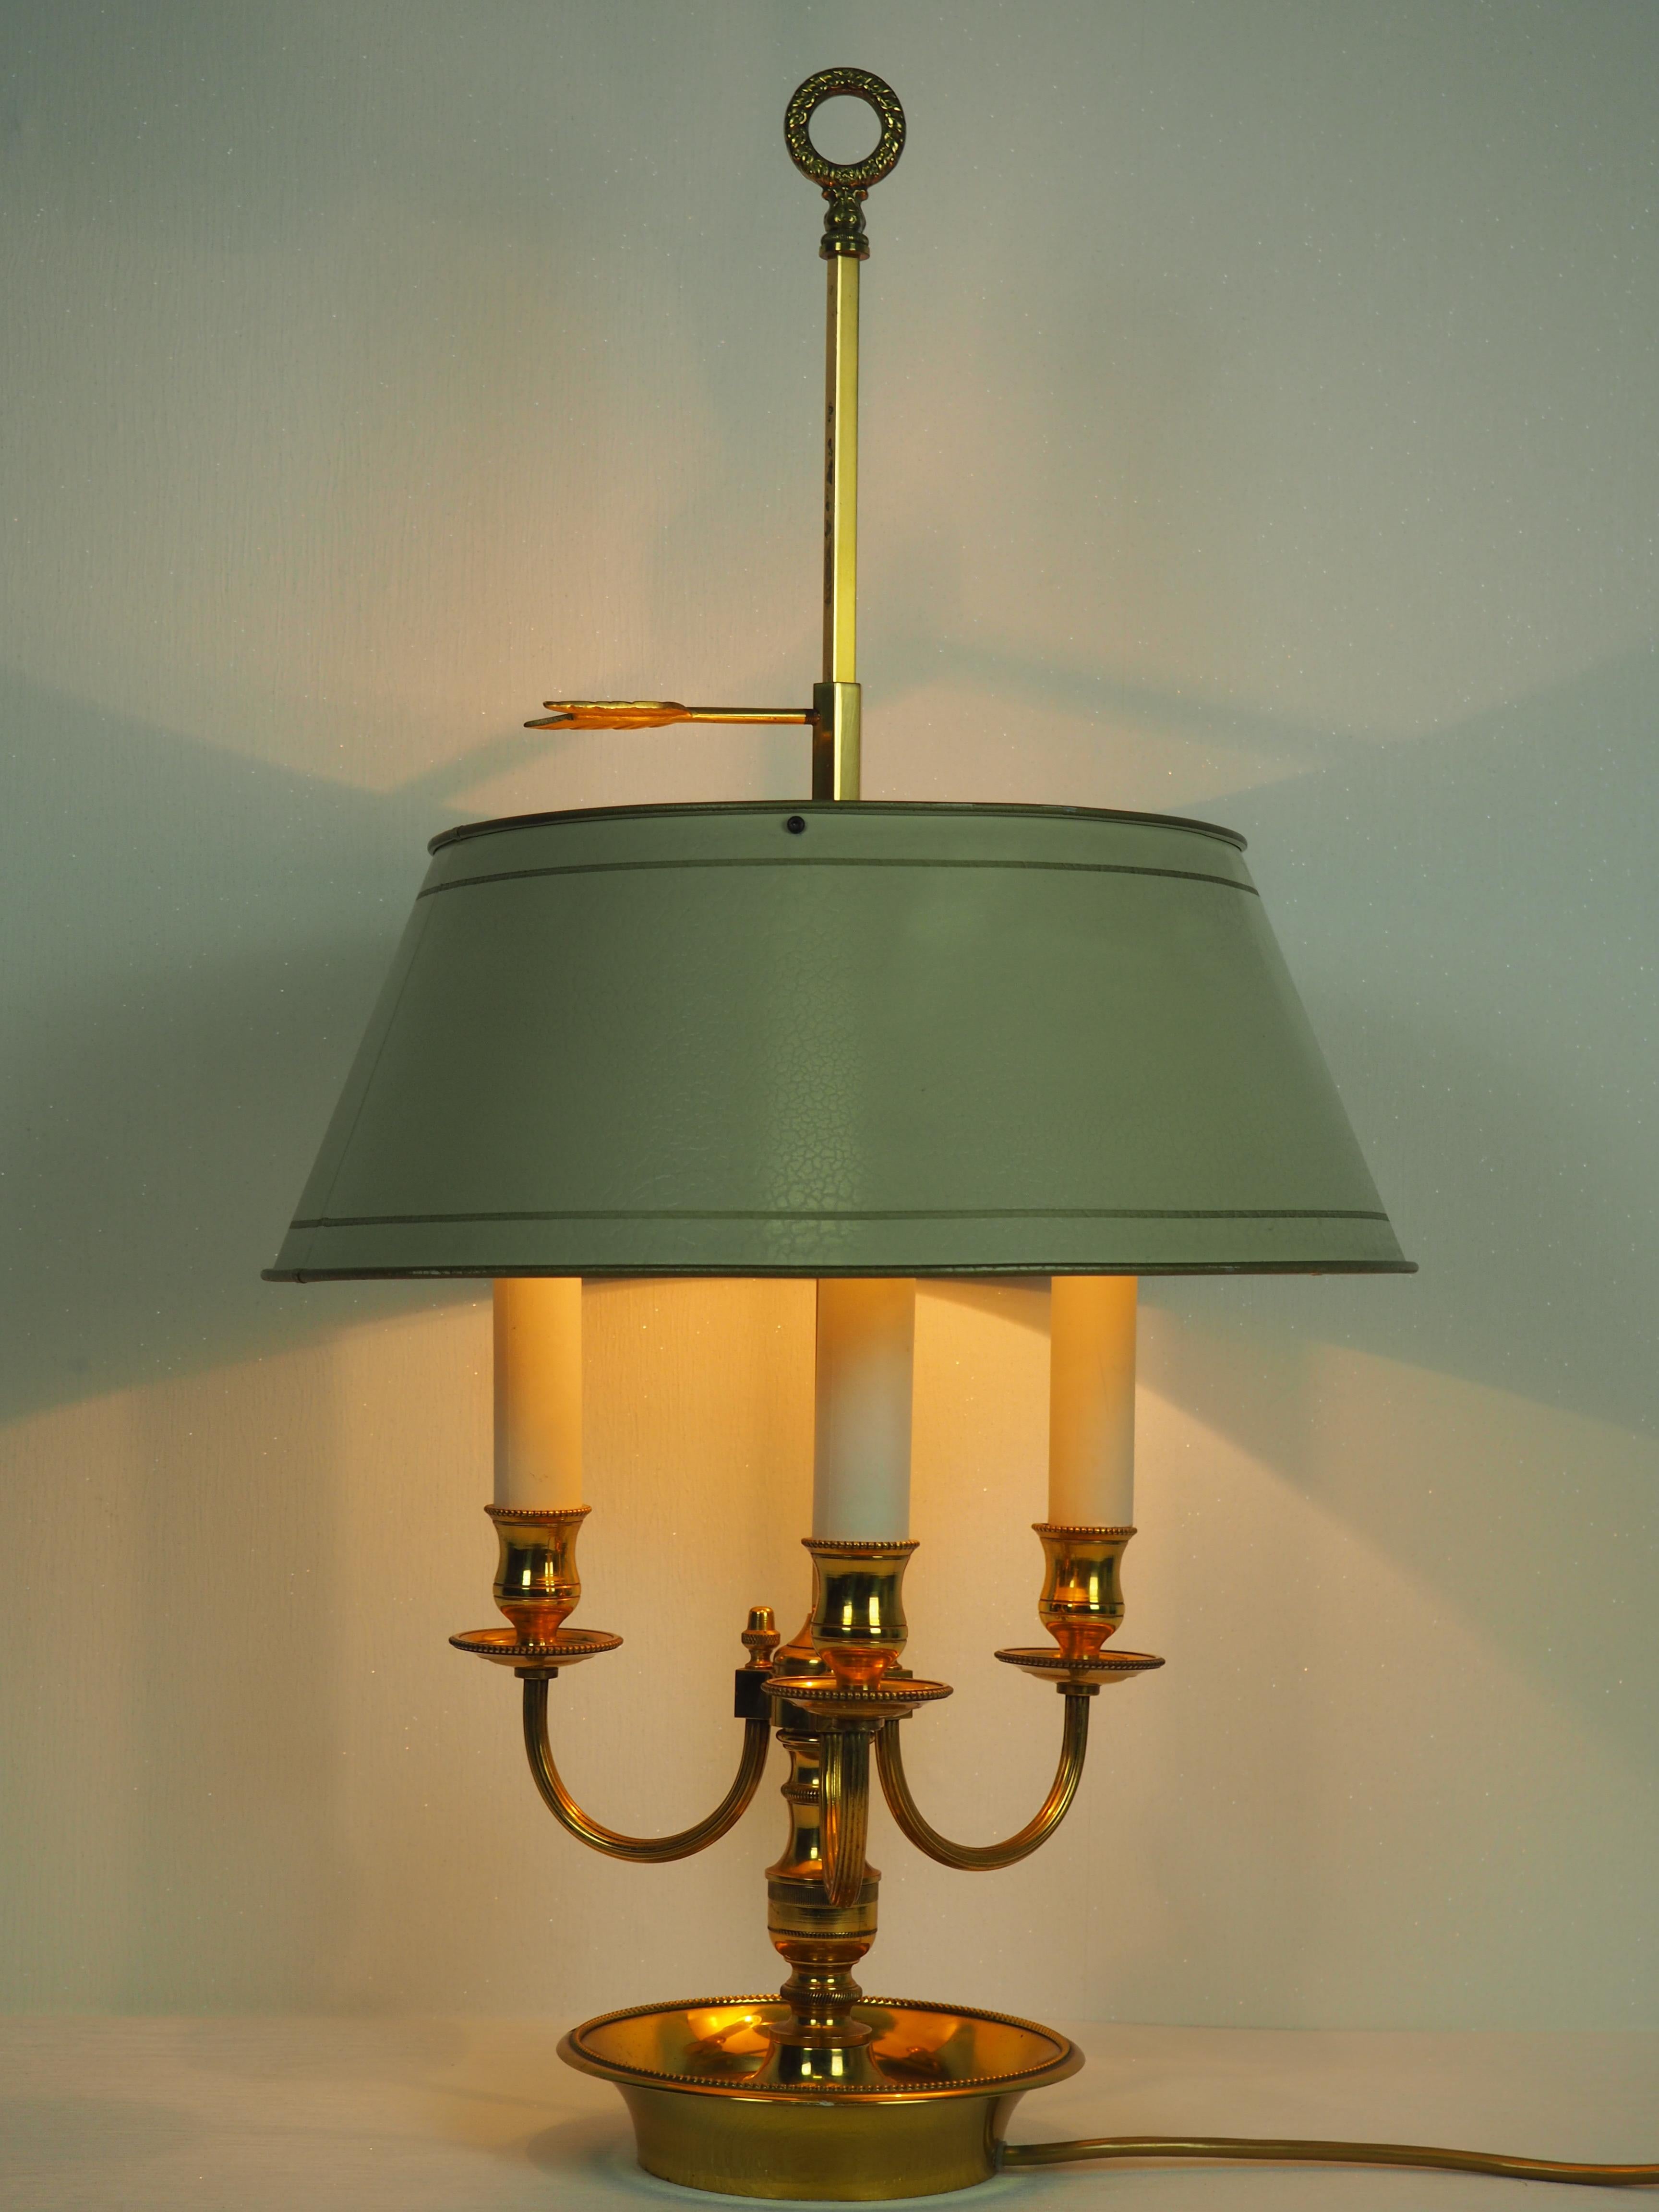 Lacquered Mid-20th Century French Bouillotte Table Lamp, circa 1950s